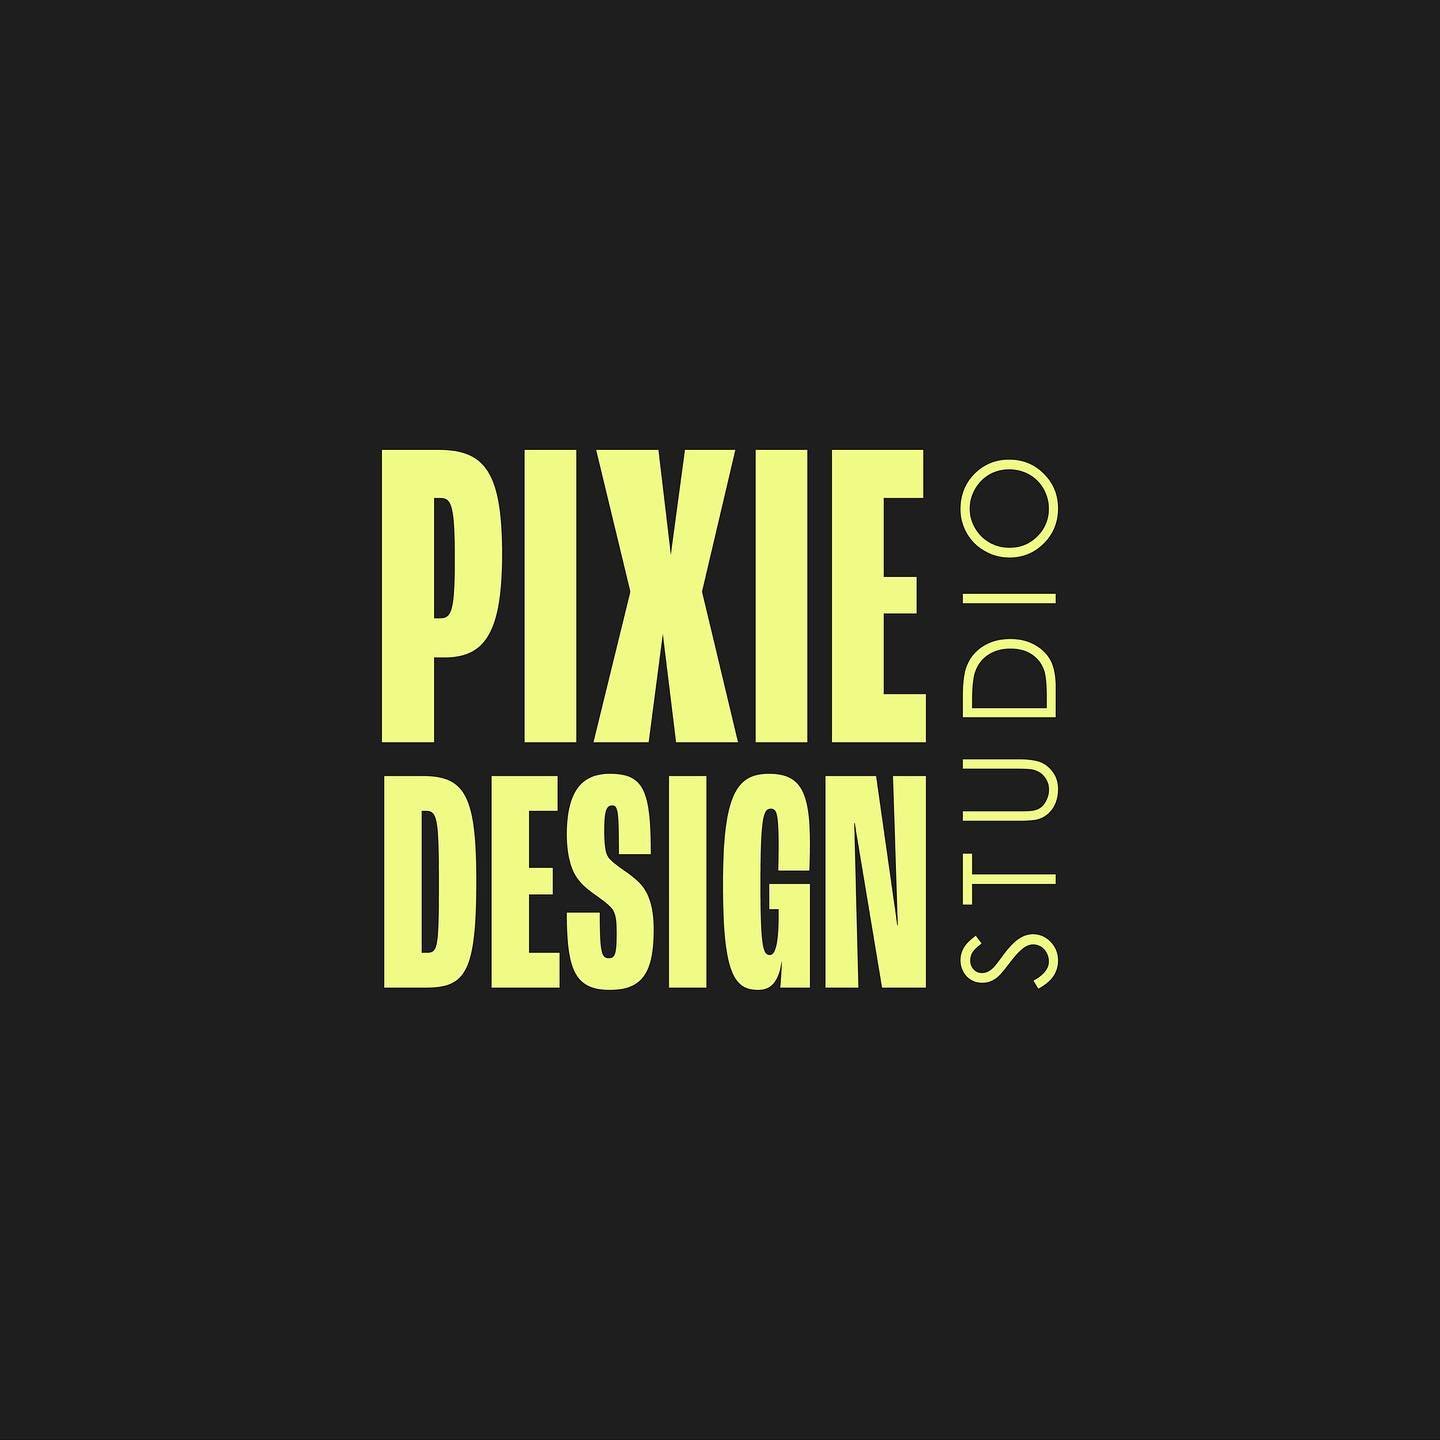 Exciting news!😜I am thrilled to announce Pixie Design Studio&rsquo;s rebrand, reflecting a more mature and refined identity that perfectly aligns with my current style and the clientele I aim to attract. As my business evolves, so does my brand, and